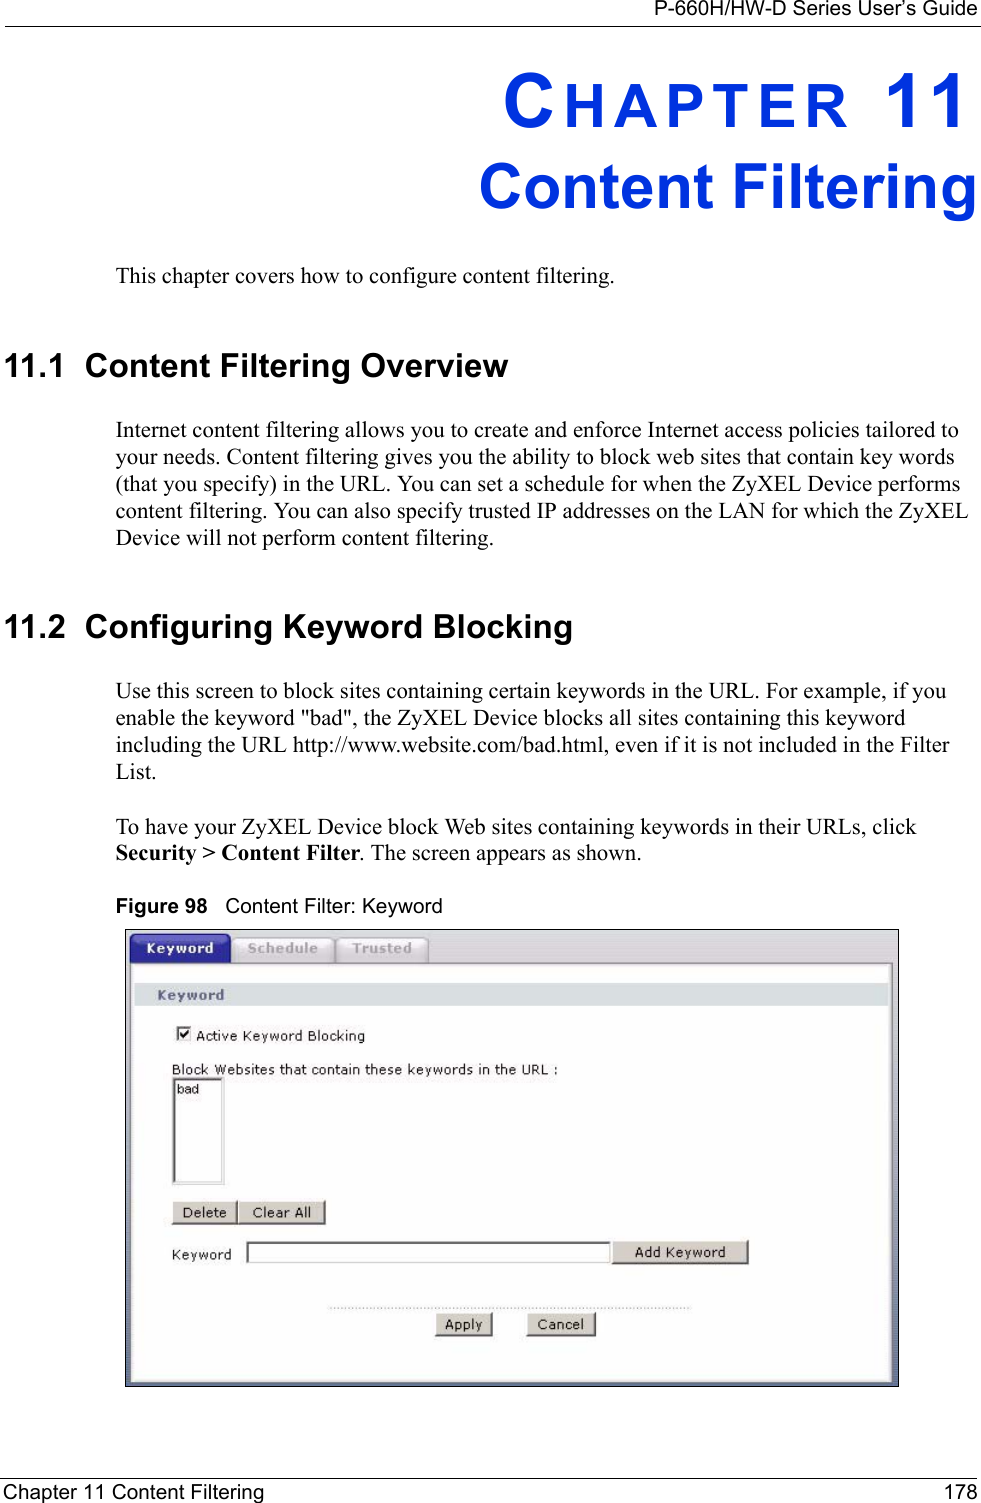 P-660H/HW-D Series User’s GuideChapter 11 Content Filtering 178CHAPTER 11Content FilteringThis chapter covers how to configure content filtering.11.1  Content Filtering Overview Internet content filtering allows you to create and enforce Internet access policies tailored to your needs. Content filtering gives you the ability to block web sites that contain key words (that you specify) in the URL. You can set a schedule for when the ZyXEL Device performs content filtering. You can also specify trusted IP addresses on the LAN for which the ZyXEL Device will not perform content filtering.11.2  Configuring Keyword Blocking  Use this screen to block sites containing certain keywords in the URL. For example, if you enable the keyword &quot;bad&quot;, the ZyXEL Device blocks all sites containing this keyword including the URL http://www.website.com/bad.html, even if it is not included in the Filter List. To have your ZyXEL Device block Web sites containing keywords in their URLs, click Security &gt; Content Filter. The screen appears as shown.Figure 98   Content Filter: Keyword